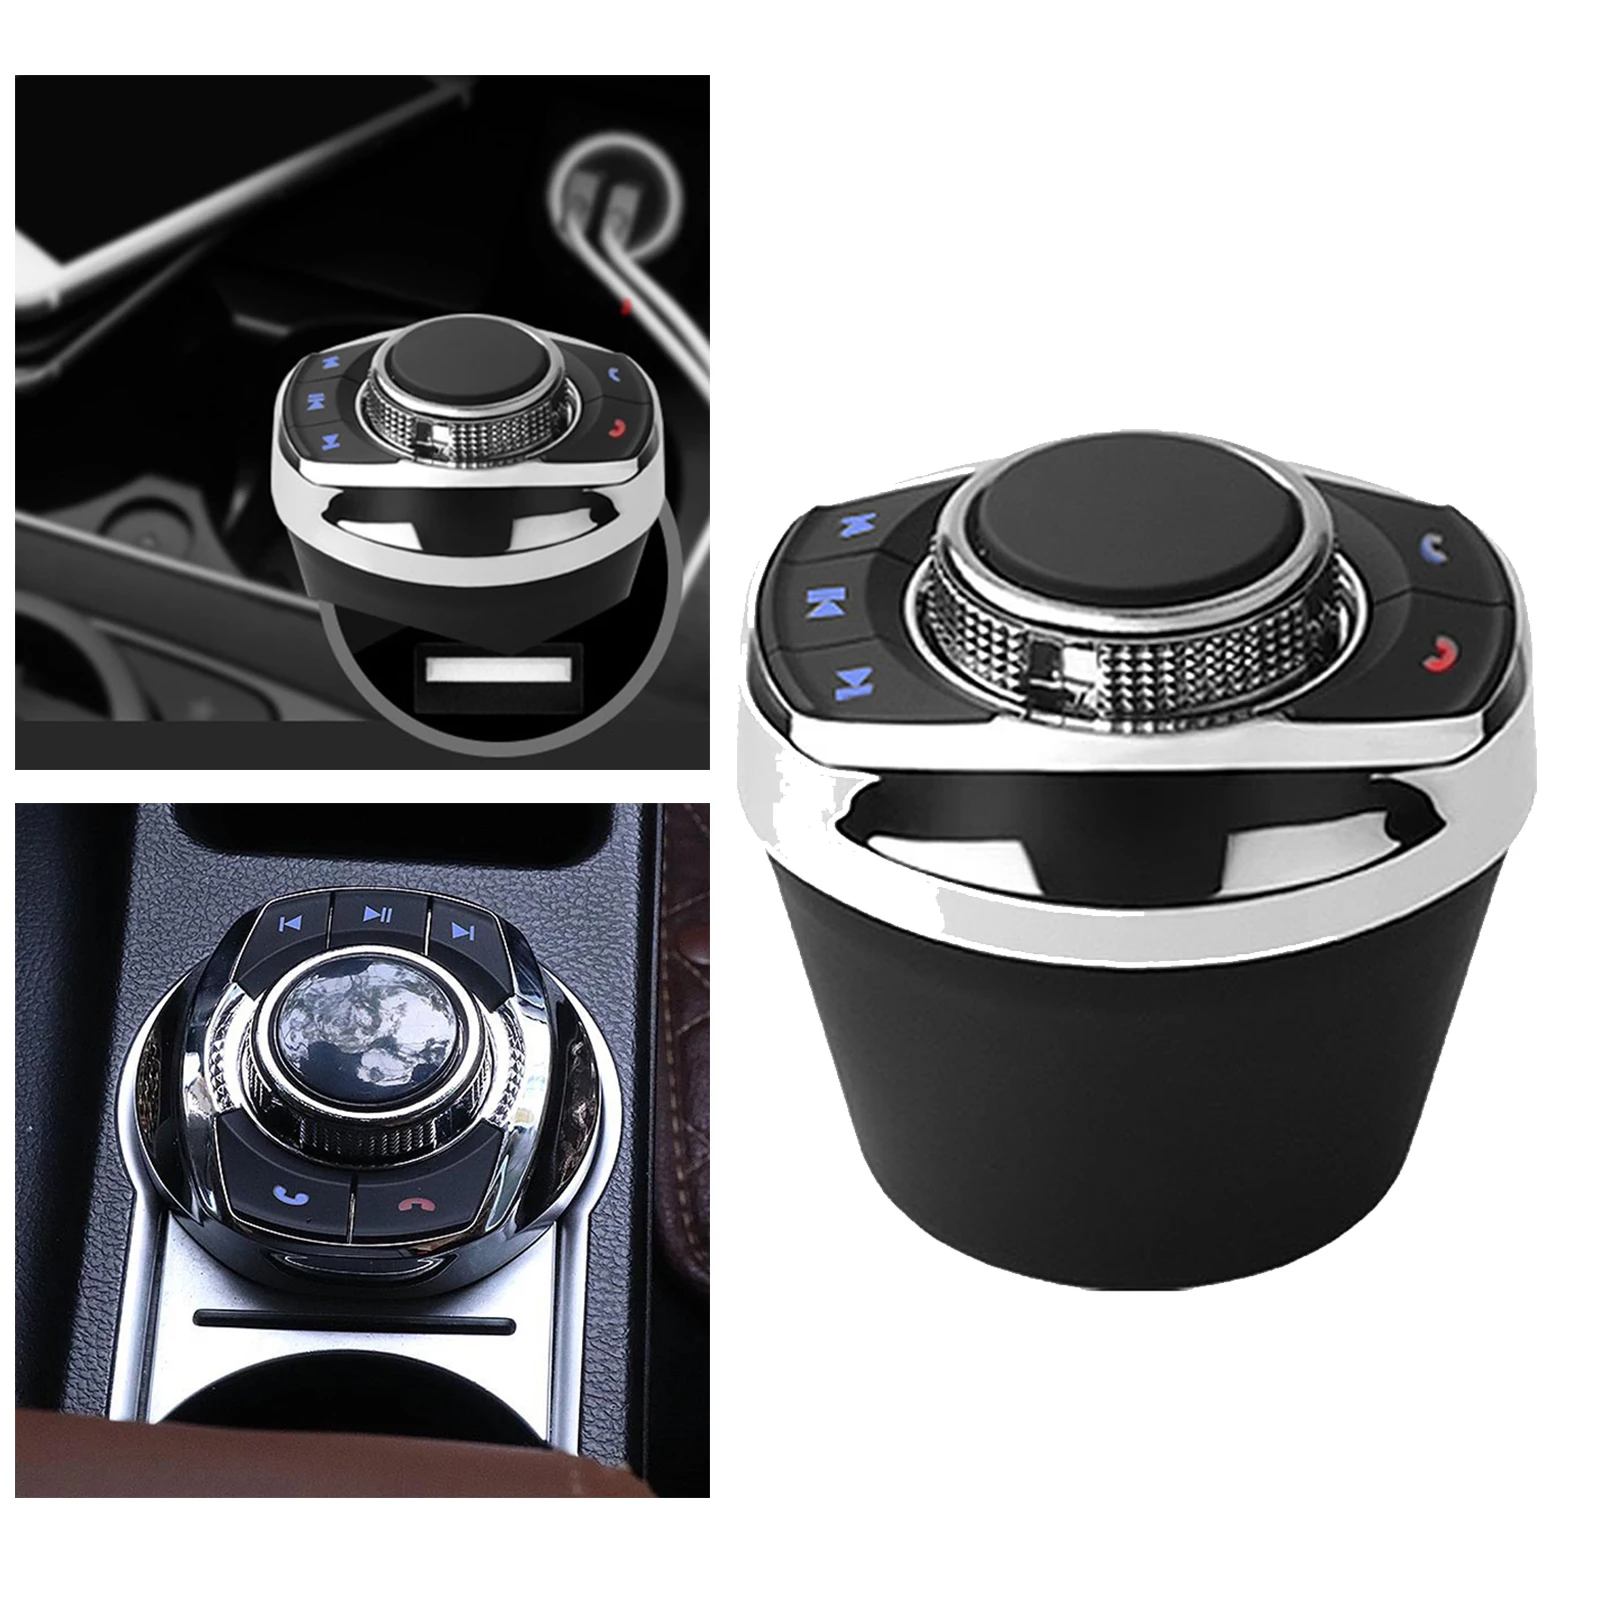 Car Wireless Steering Wheel Control Button Cup Shape With LED Light 8-Key Functions For Car Android Navigation Player